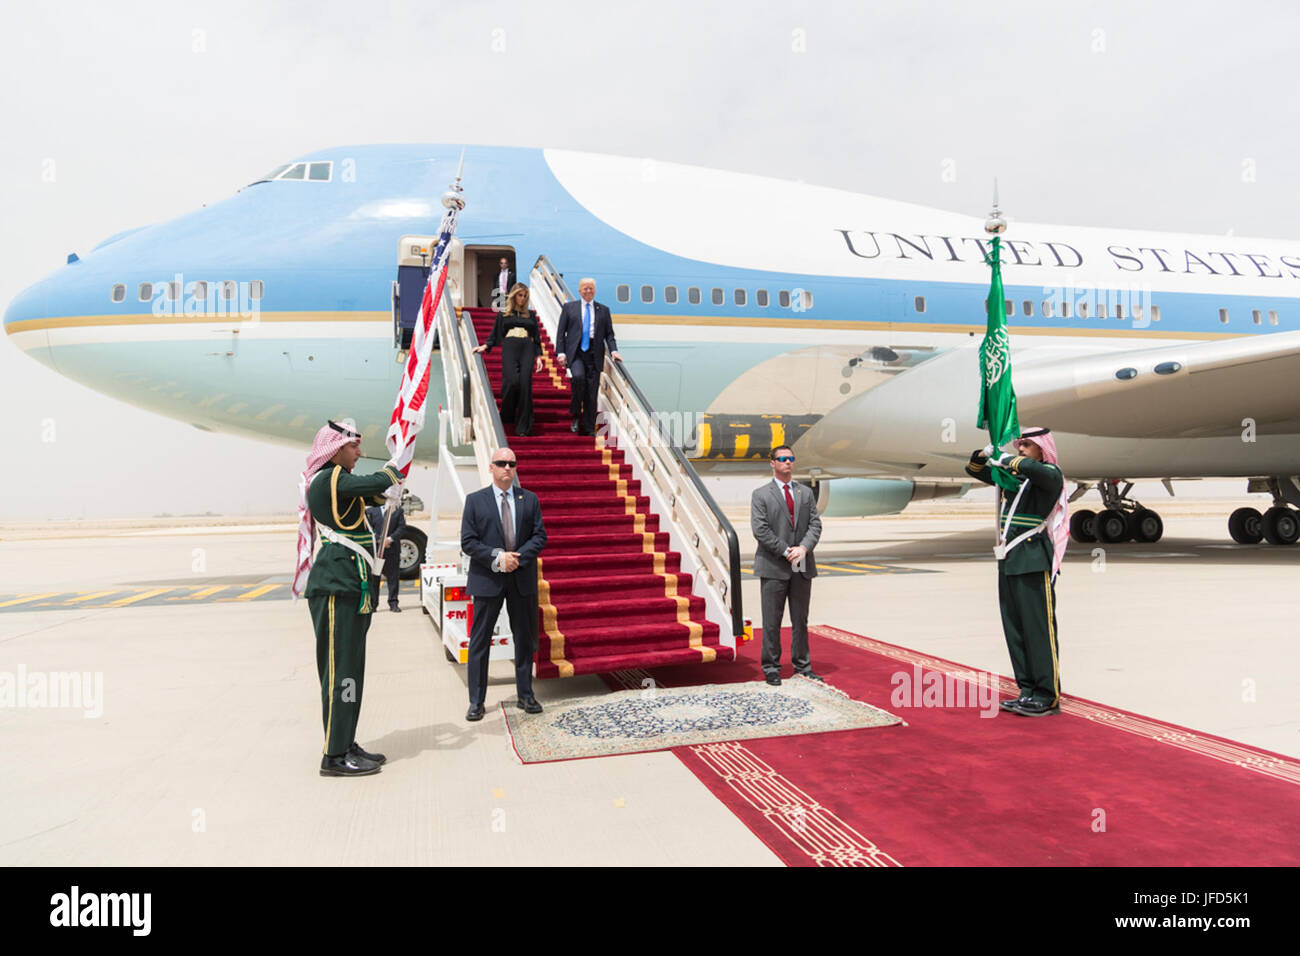 President Donald Trump and First Lady Melania Trump walk down red-carpeted stairs, Saturday, May 20, 2017, on their arrival to King Khalid International Airport in Riyadh, Saudi Arabia. (Official White House Photo by Shealah Craighead) Stock Photo